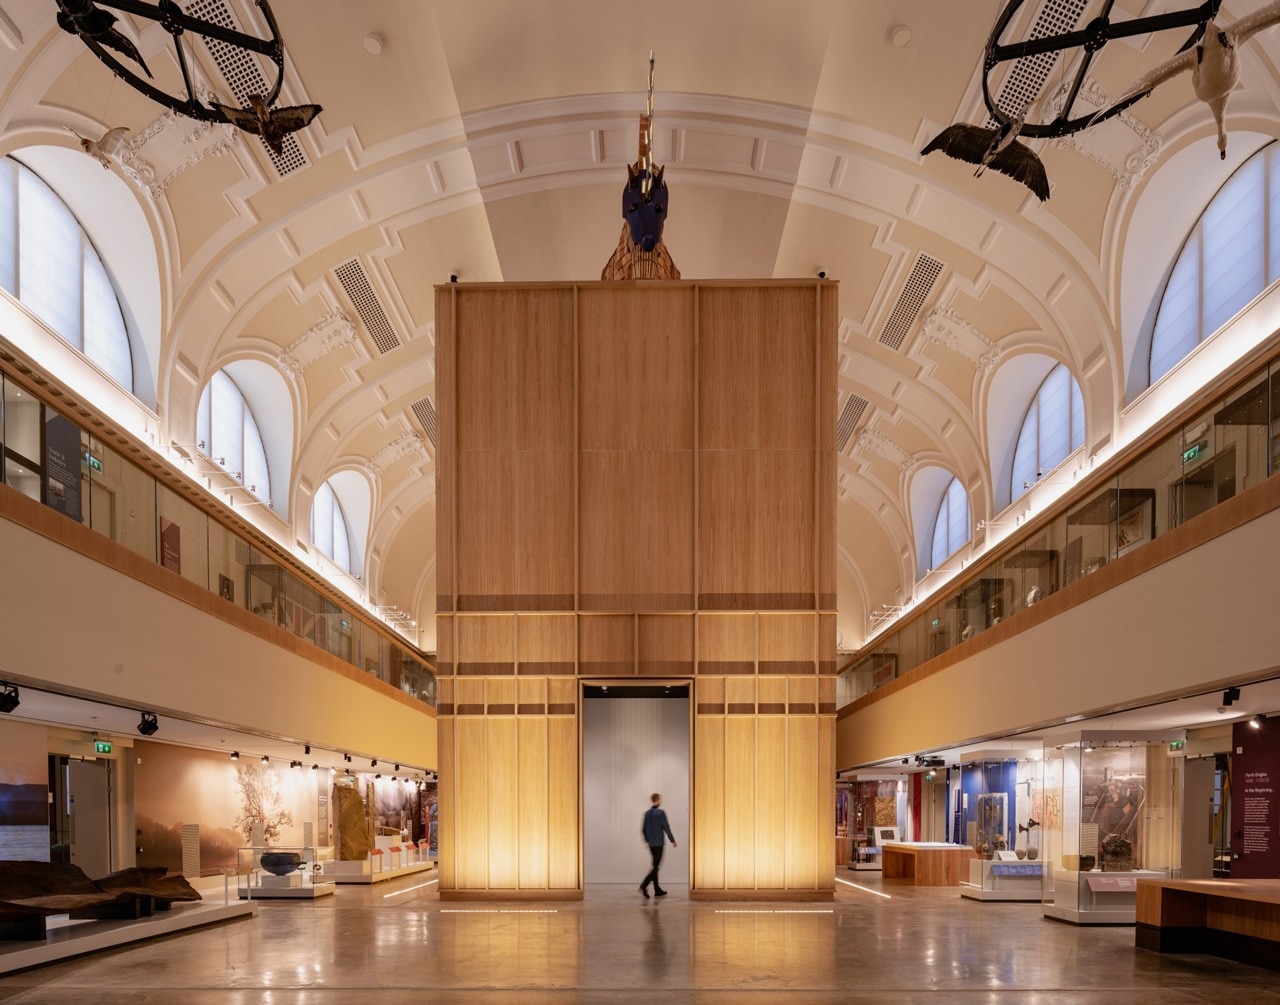 Mecanoo converts an ancient city hall in Scotland into a museum